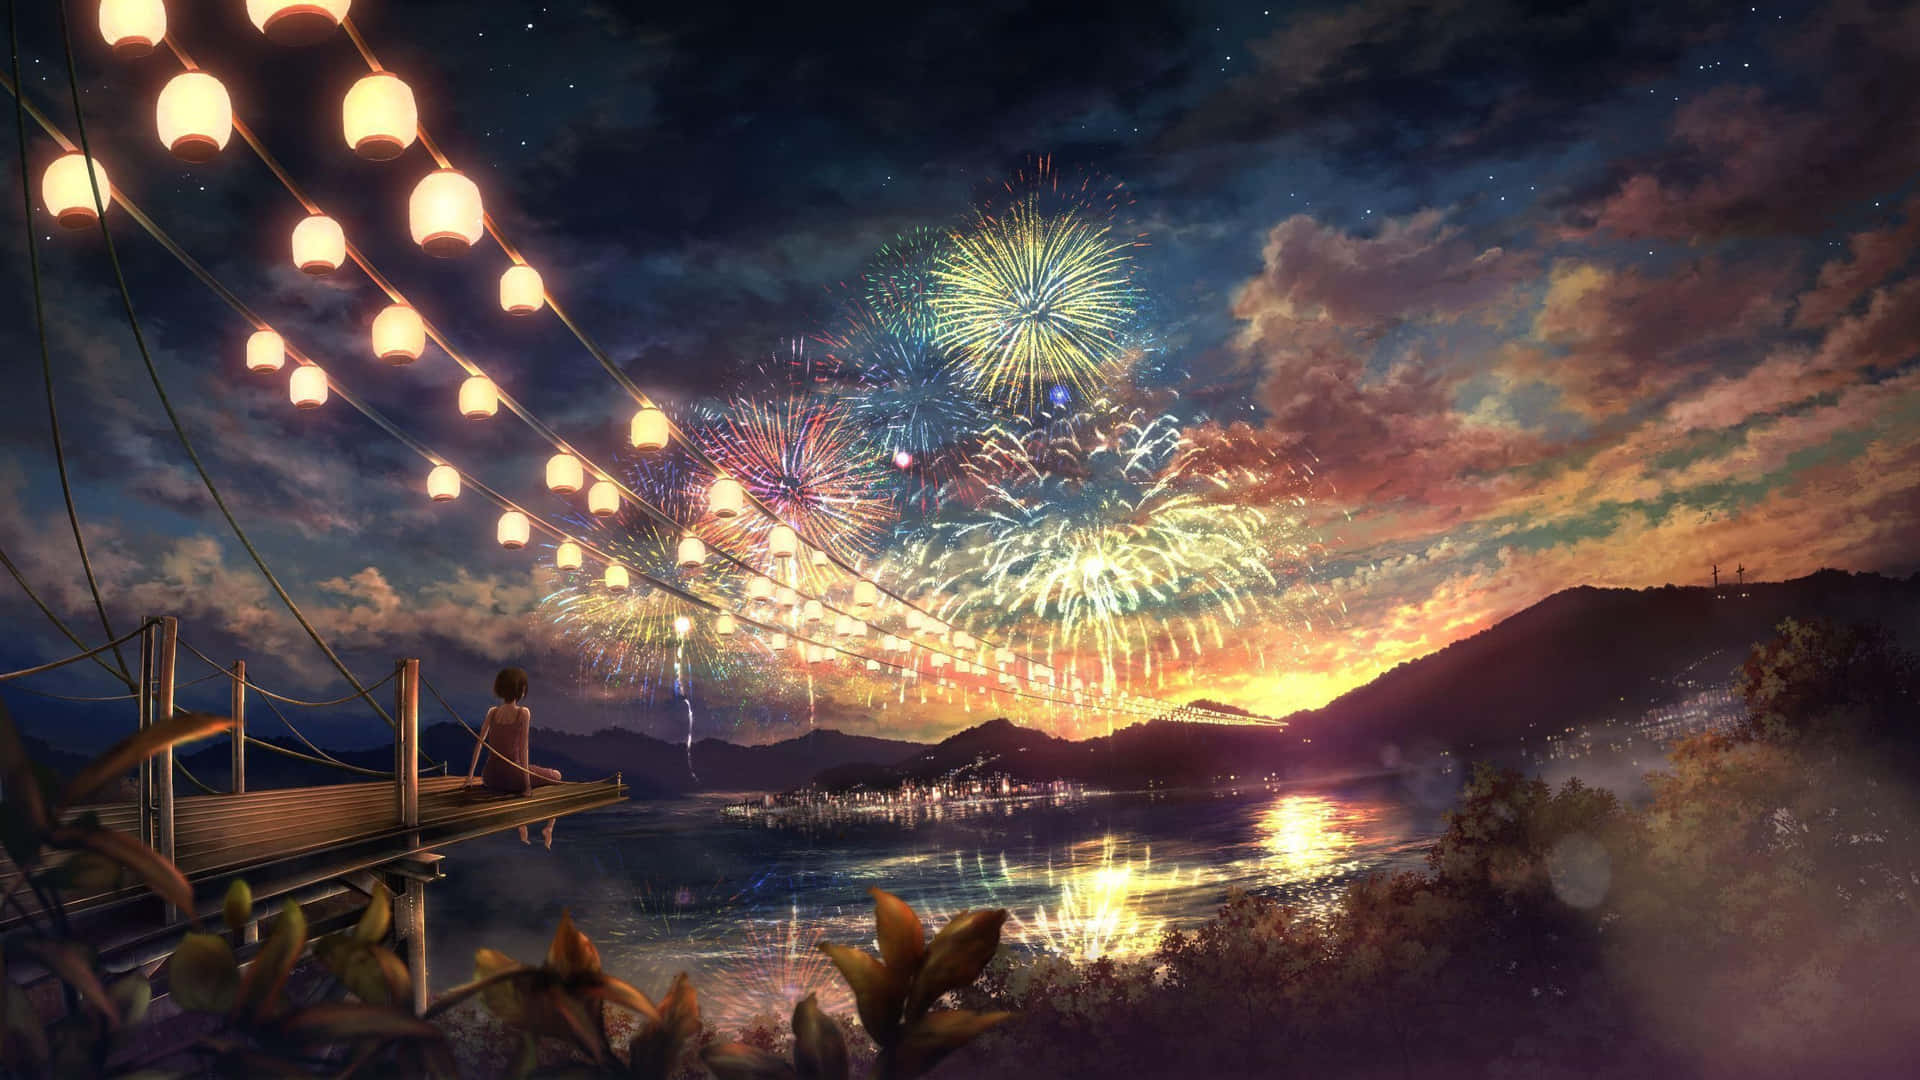 A Surreal Landscape From A Beautiful Anime Wallpaper